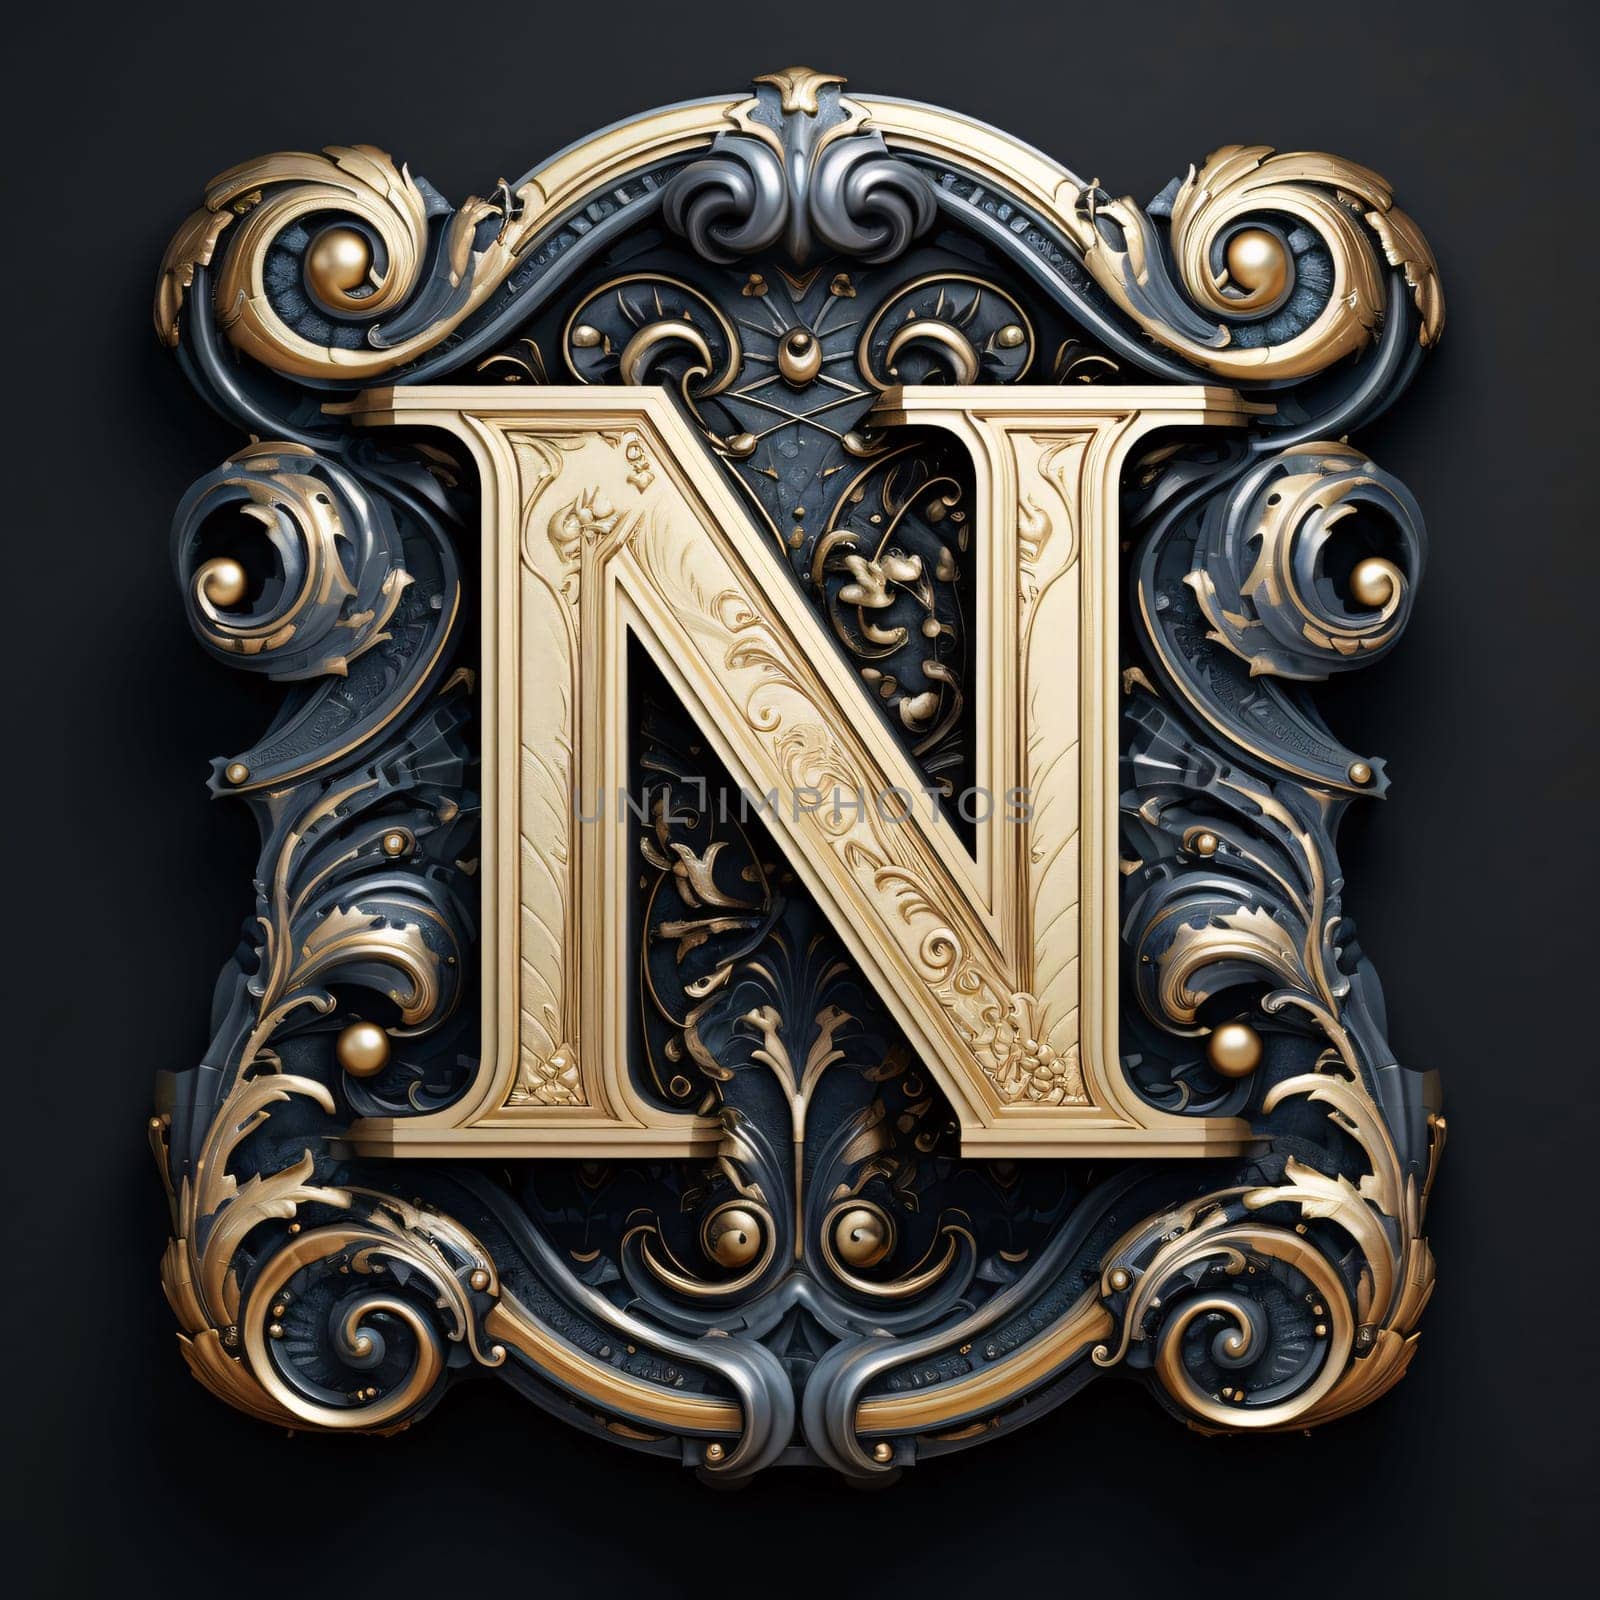 Graphic alphabet letters: Luxury royal capital letter N on a black background. 3d render